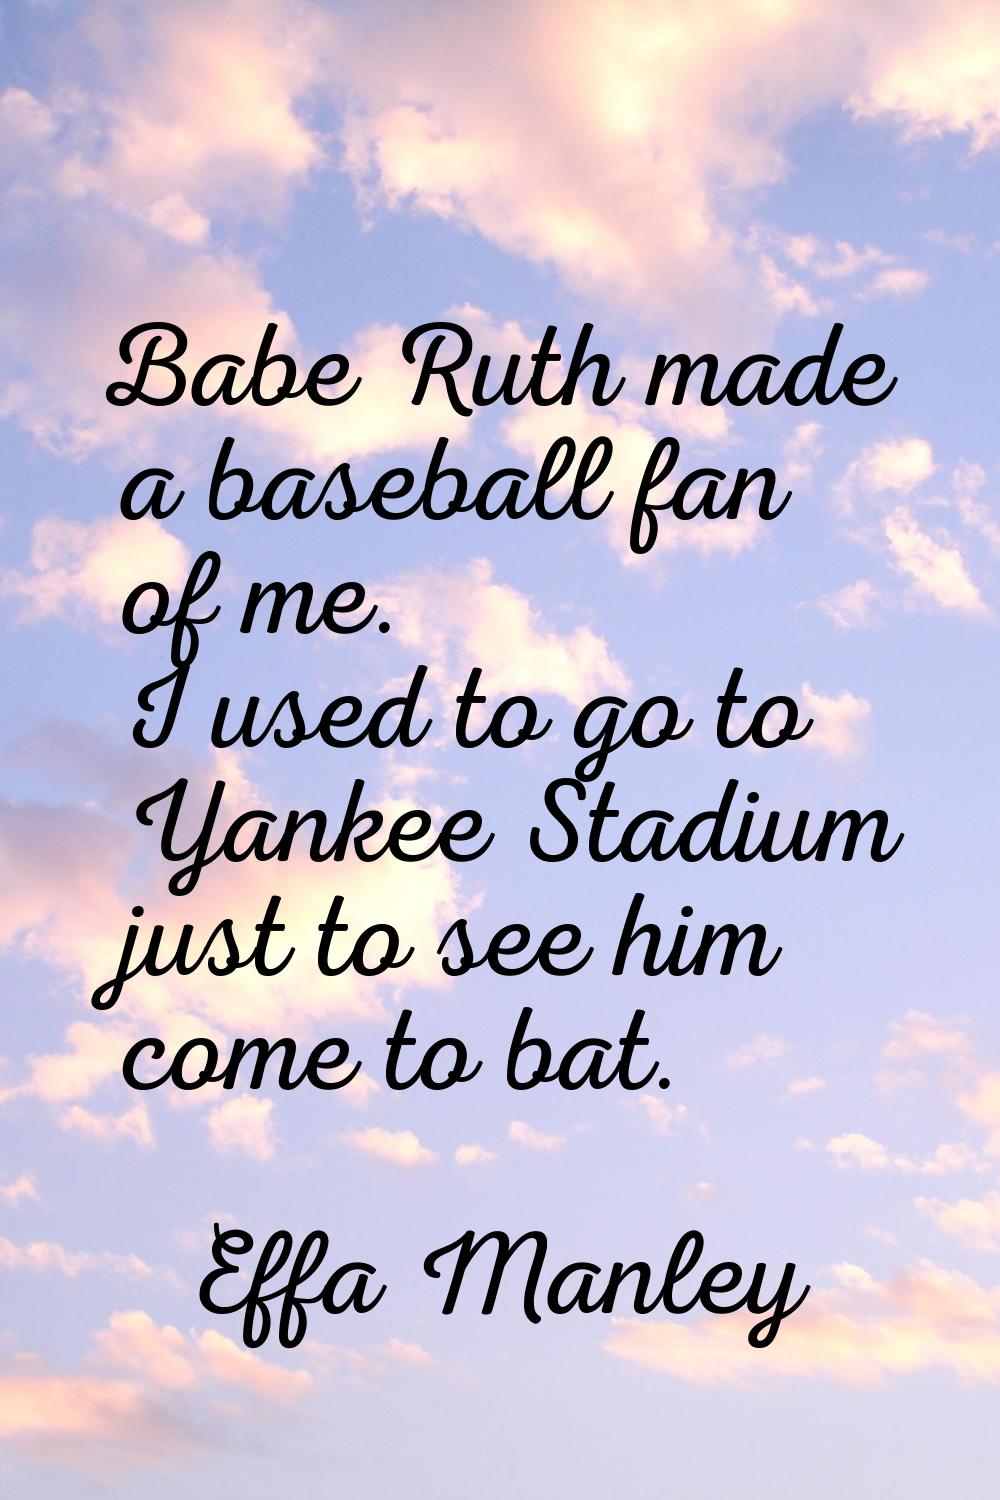 Babe Ruth made a baseball fan of me. I used to go to Yankee Stadium just to see him come to bat.